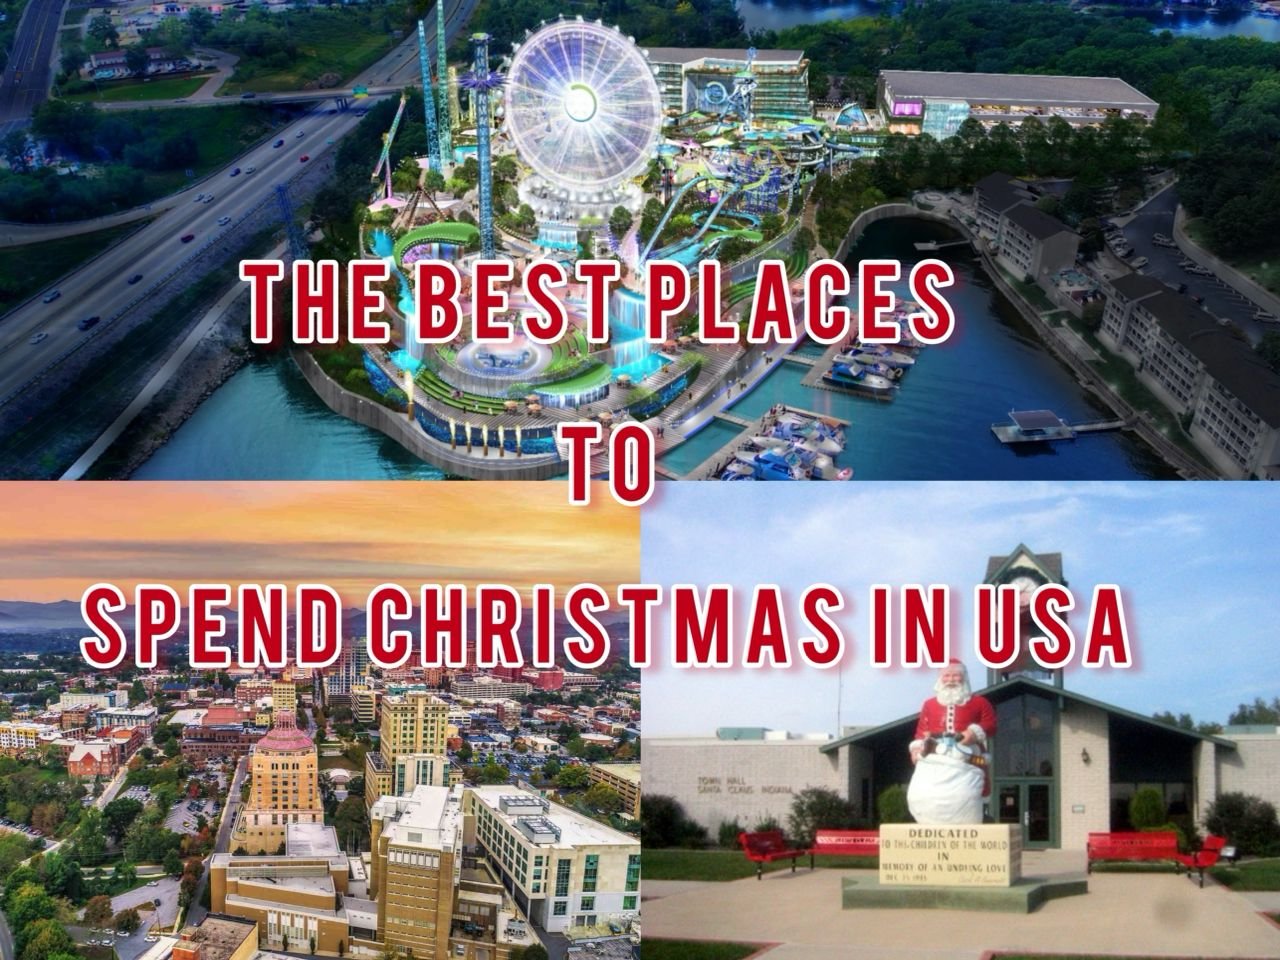 The 6 best places to celebrate Christmas in USA (United States of America)